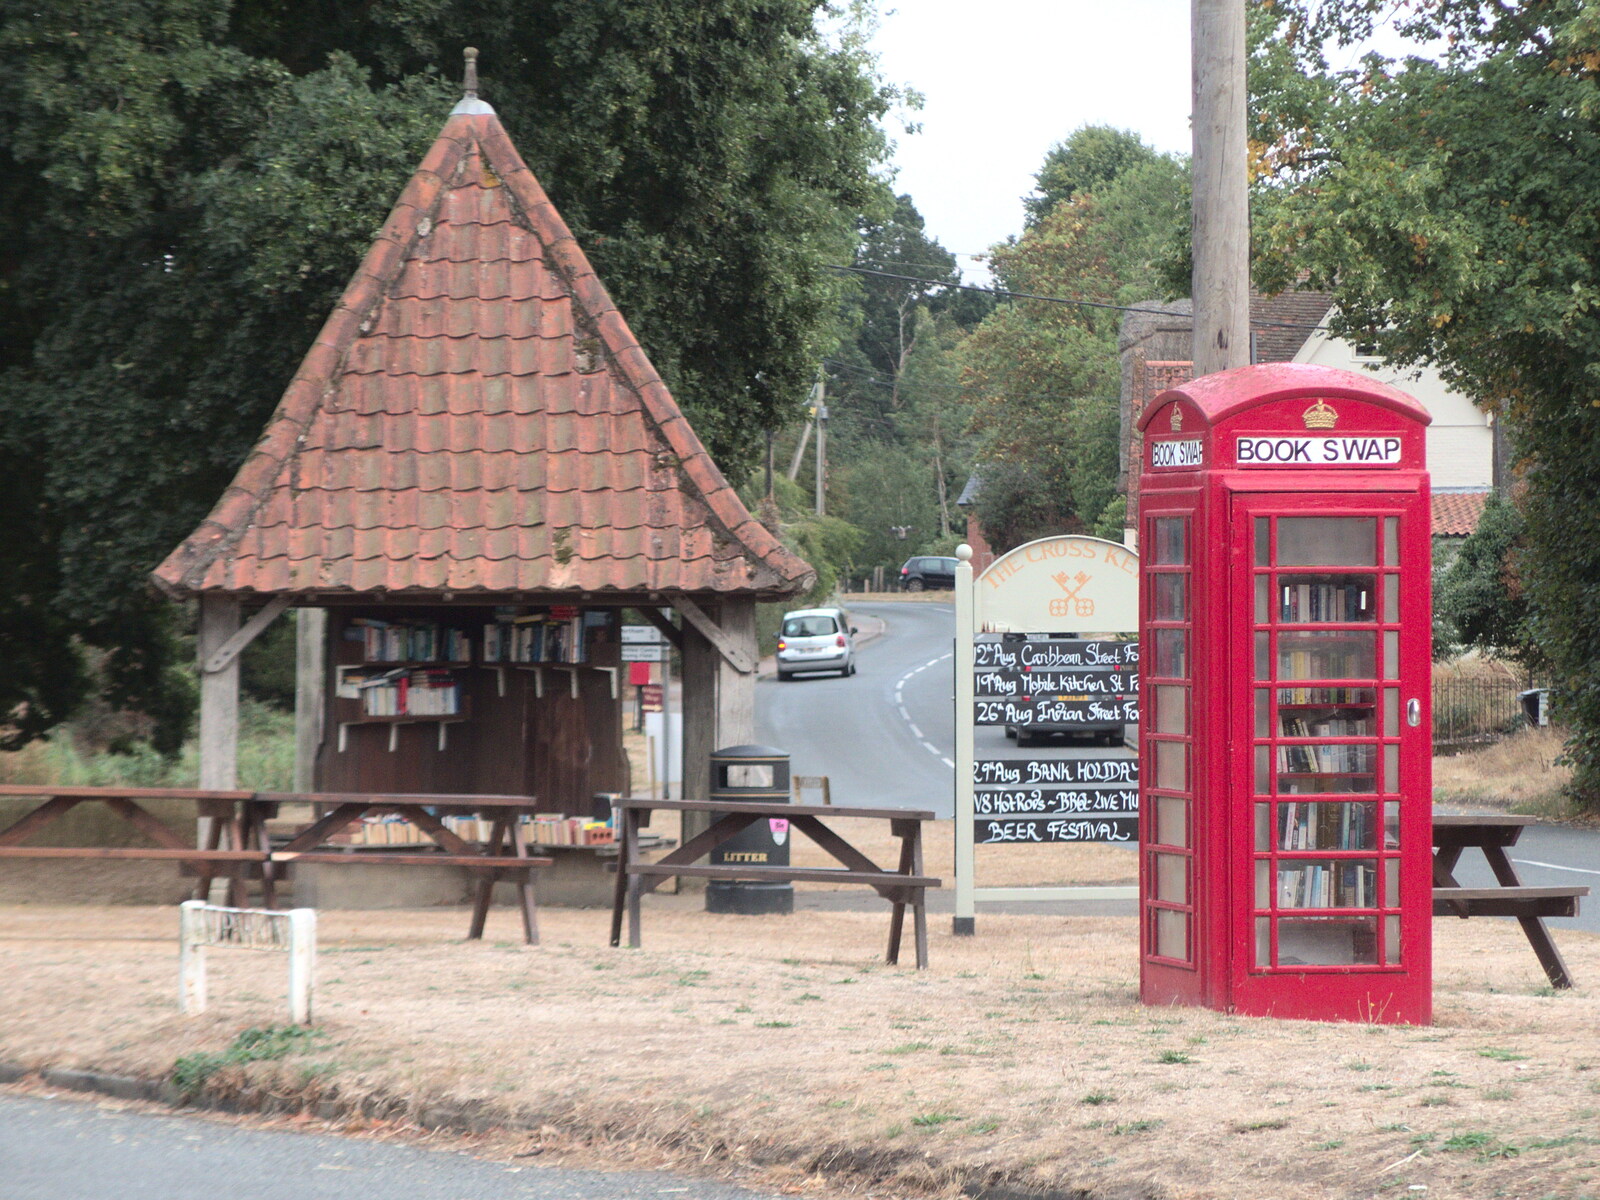 Book Swap on the village green at Redgrave from The BSCC at the Cross Keys, Redgrave, Suffolk - 25th August 2022